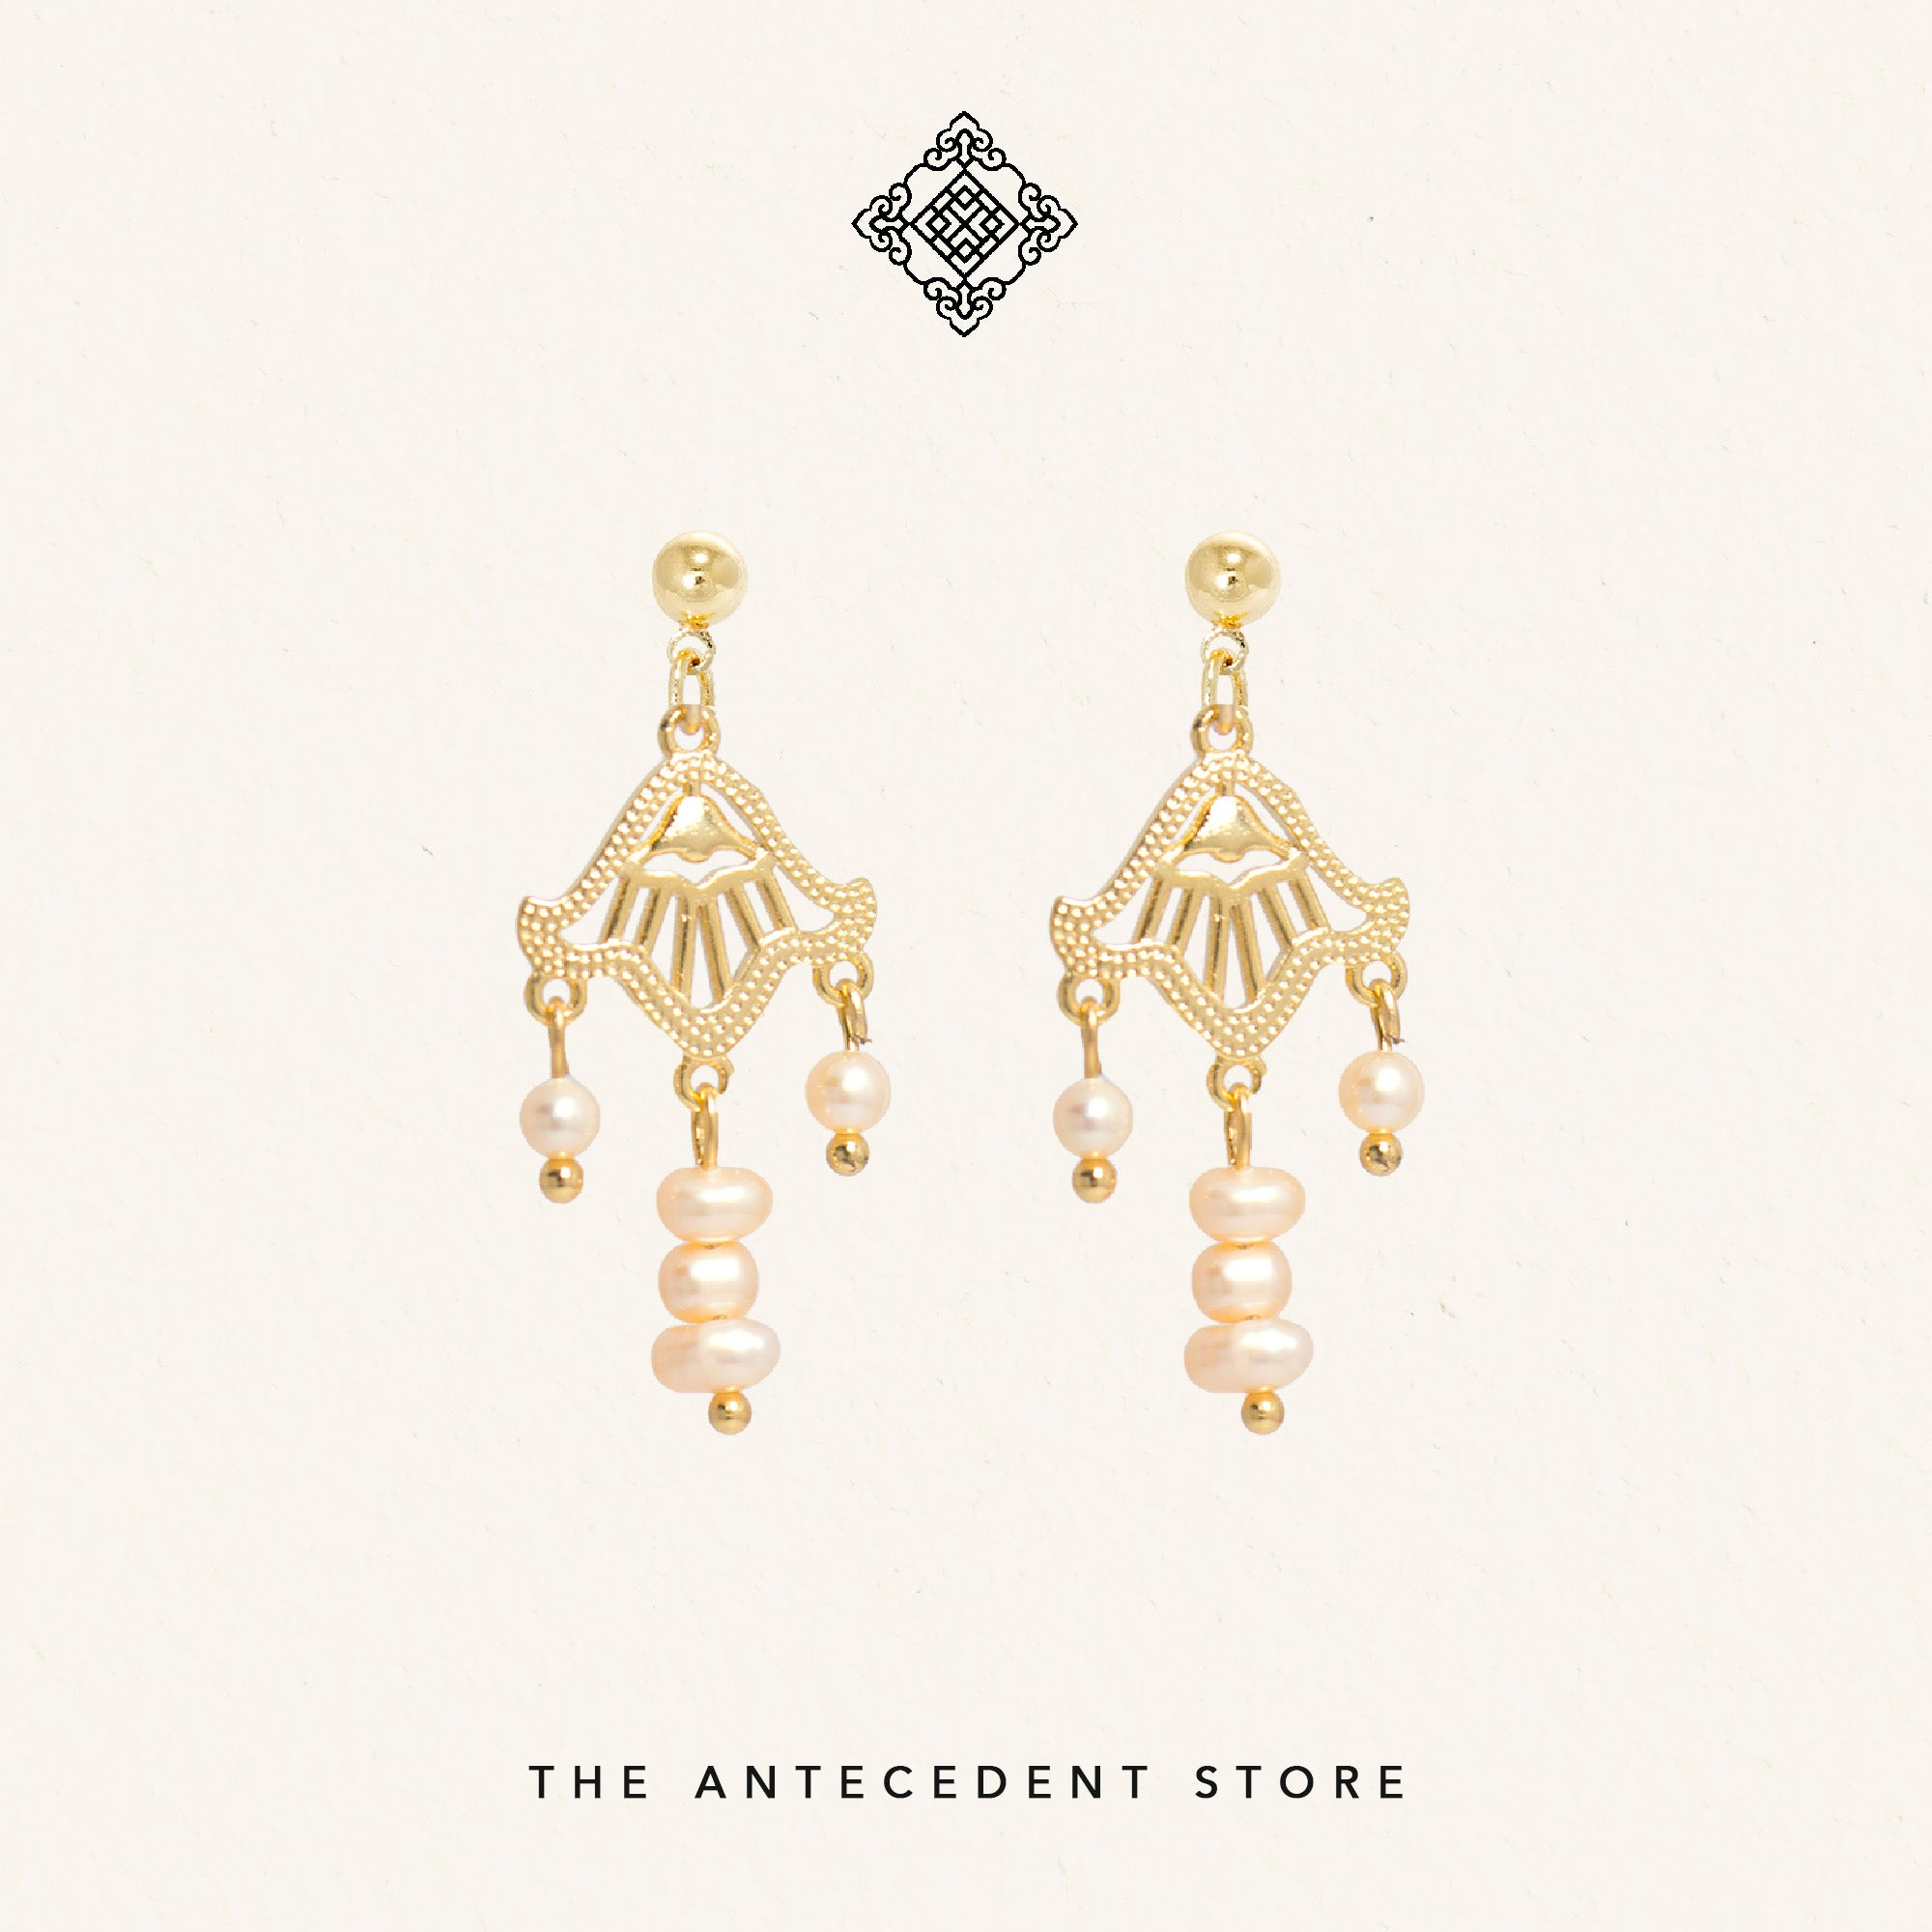 Oriental Motif Earrings With Freshwater Pearls - 14K Real Gold Plated Jewelry